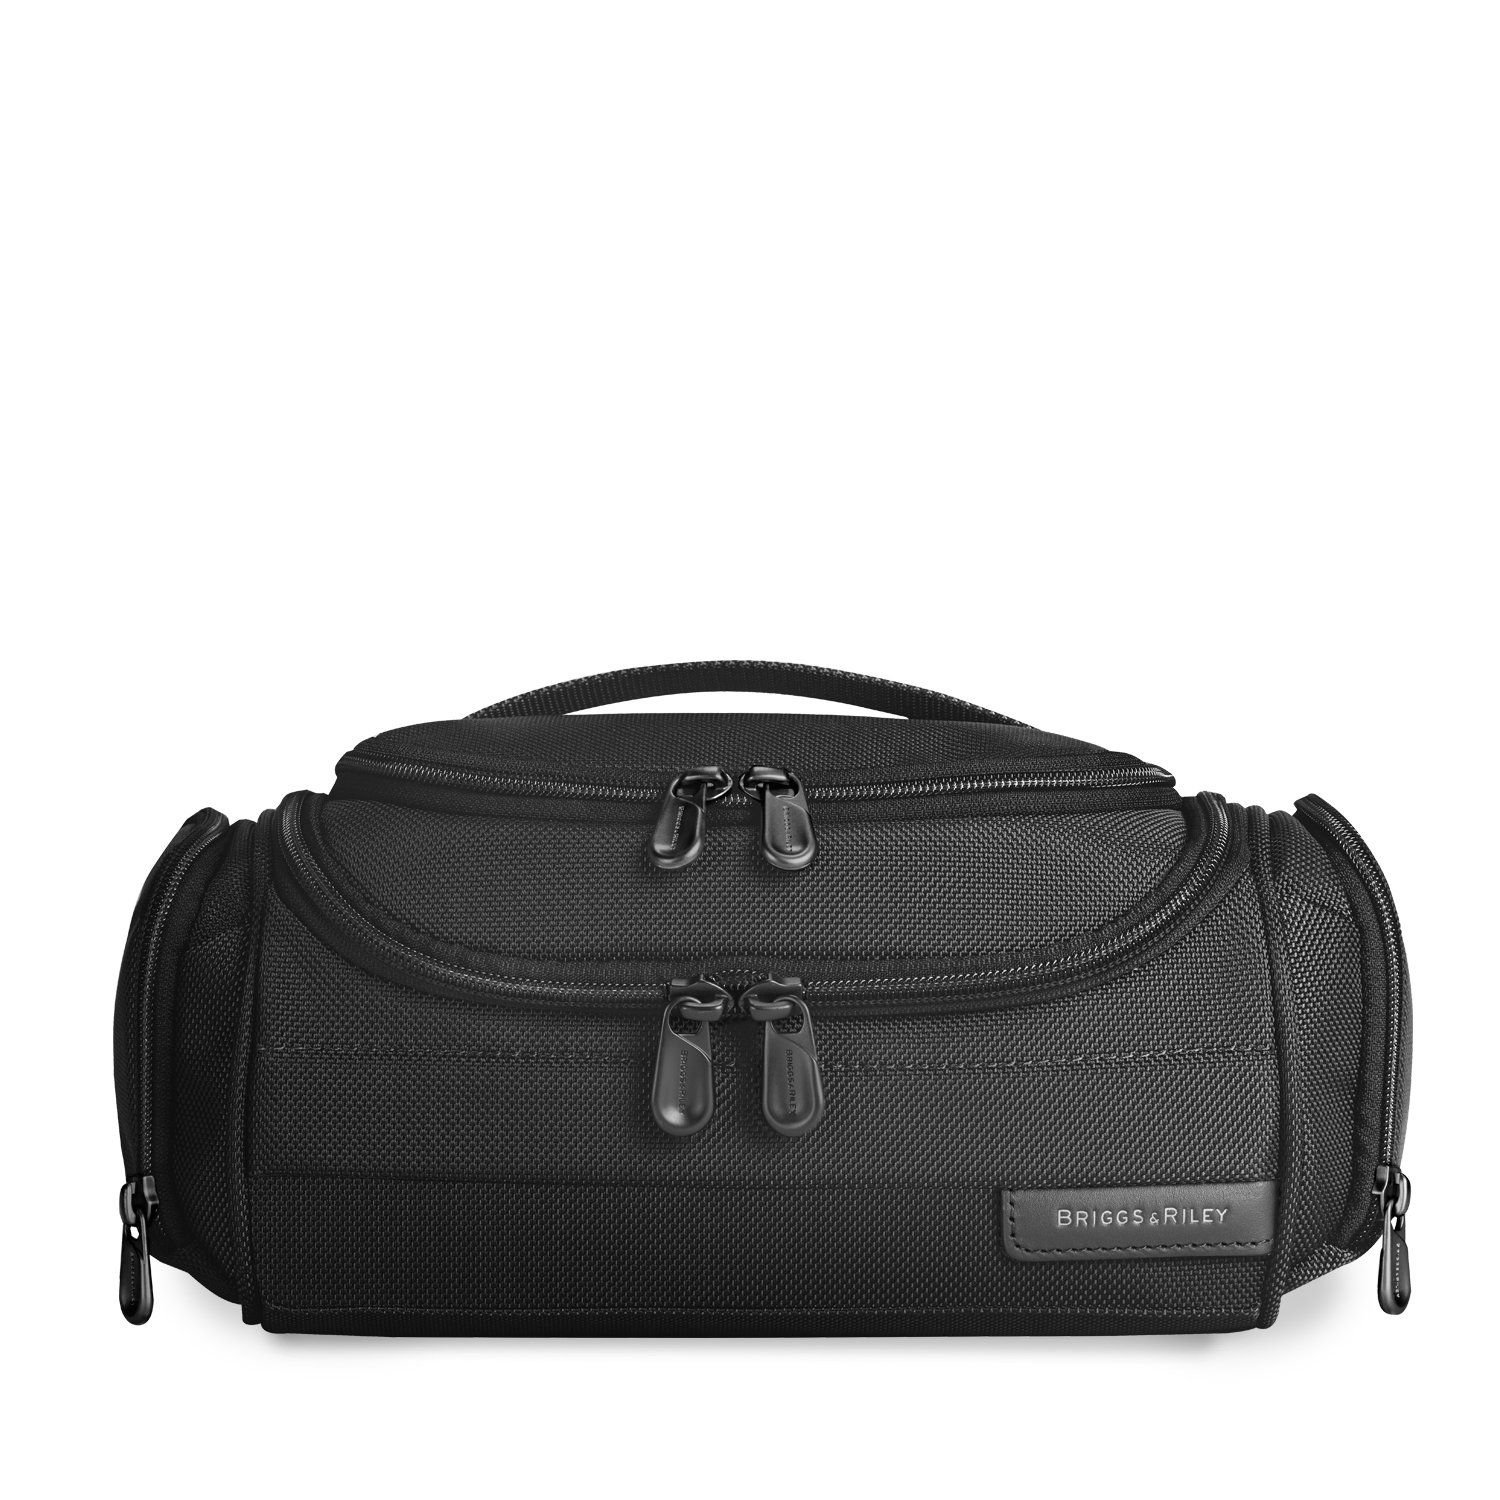 Designed for executives on the go, this smartly designed toiletry kit is as much a top performer as any Baseline luggage bag. Intuitive pockets keep all your essentials at your fingertips. Key features include: Main compartment is wet/dry to keep leaks from spreading into your luggage. Large U-shaped opening allows easy access into roomy main compartment. Four section design keeps you organised. Easy access transparent top pocket and gusseted side pockets are wet/dry to keep leaks from spreading. A webbing side handle for easy carrying. Rubber feet positioned on base lift kit off wet surfaces.